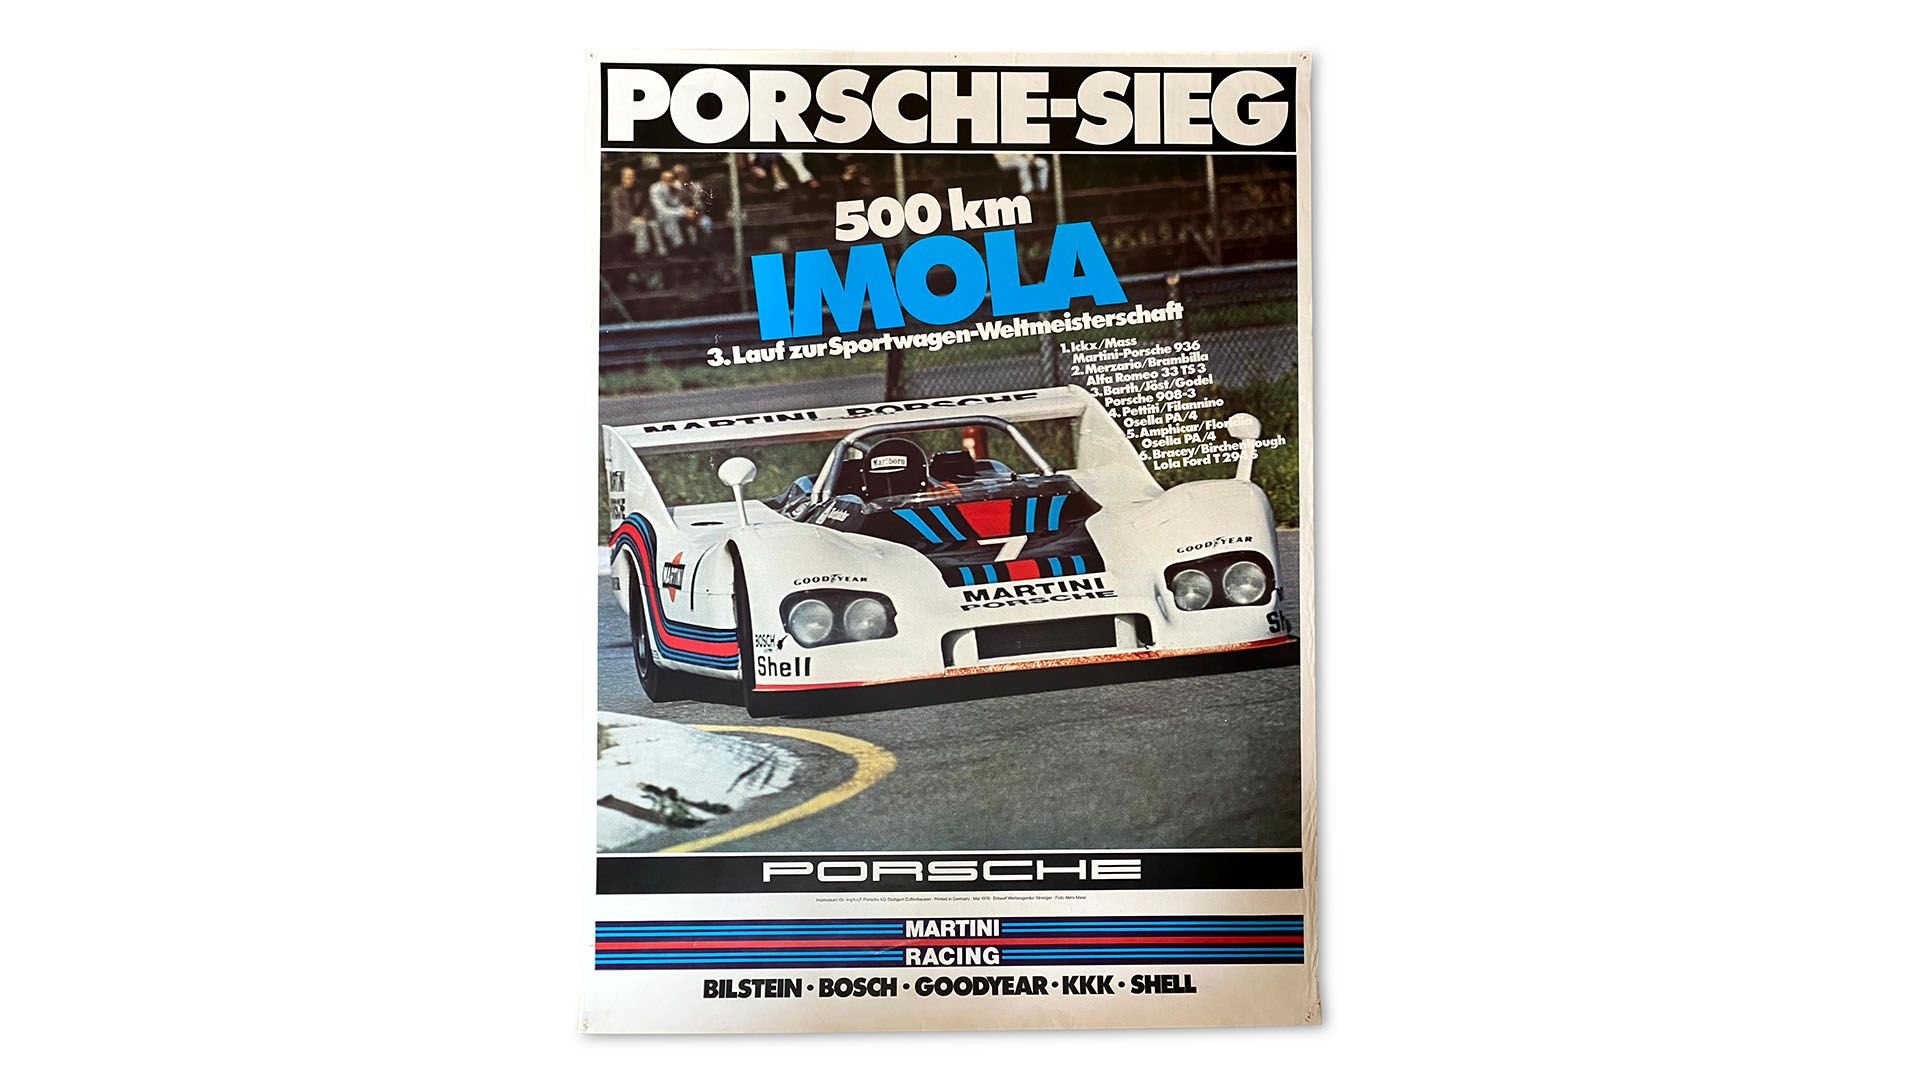 Group of 10 martini porsche 935 and 936 factory racing posters 1976